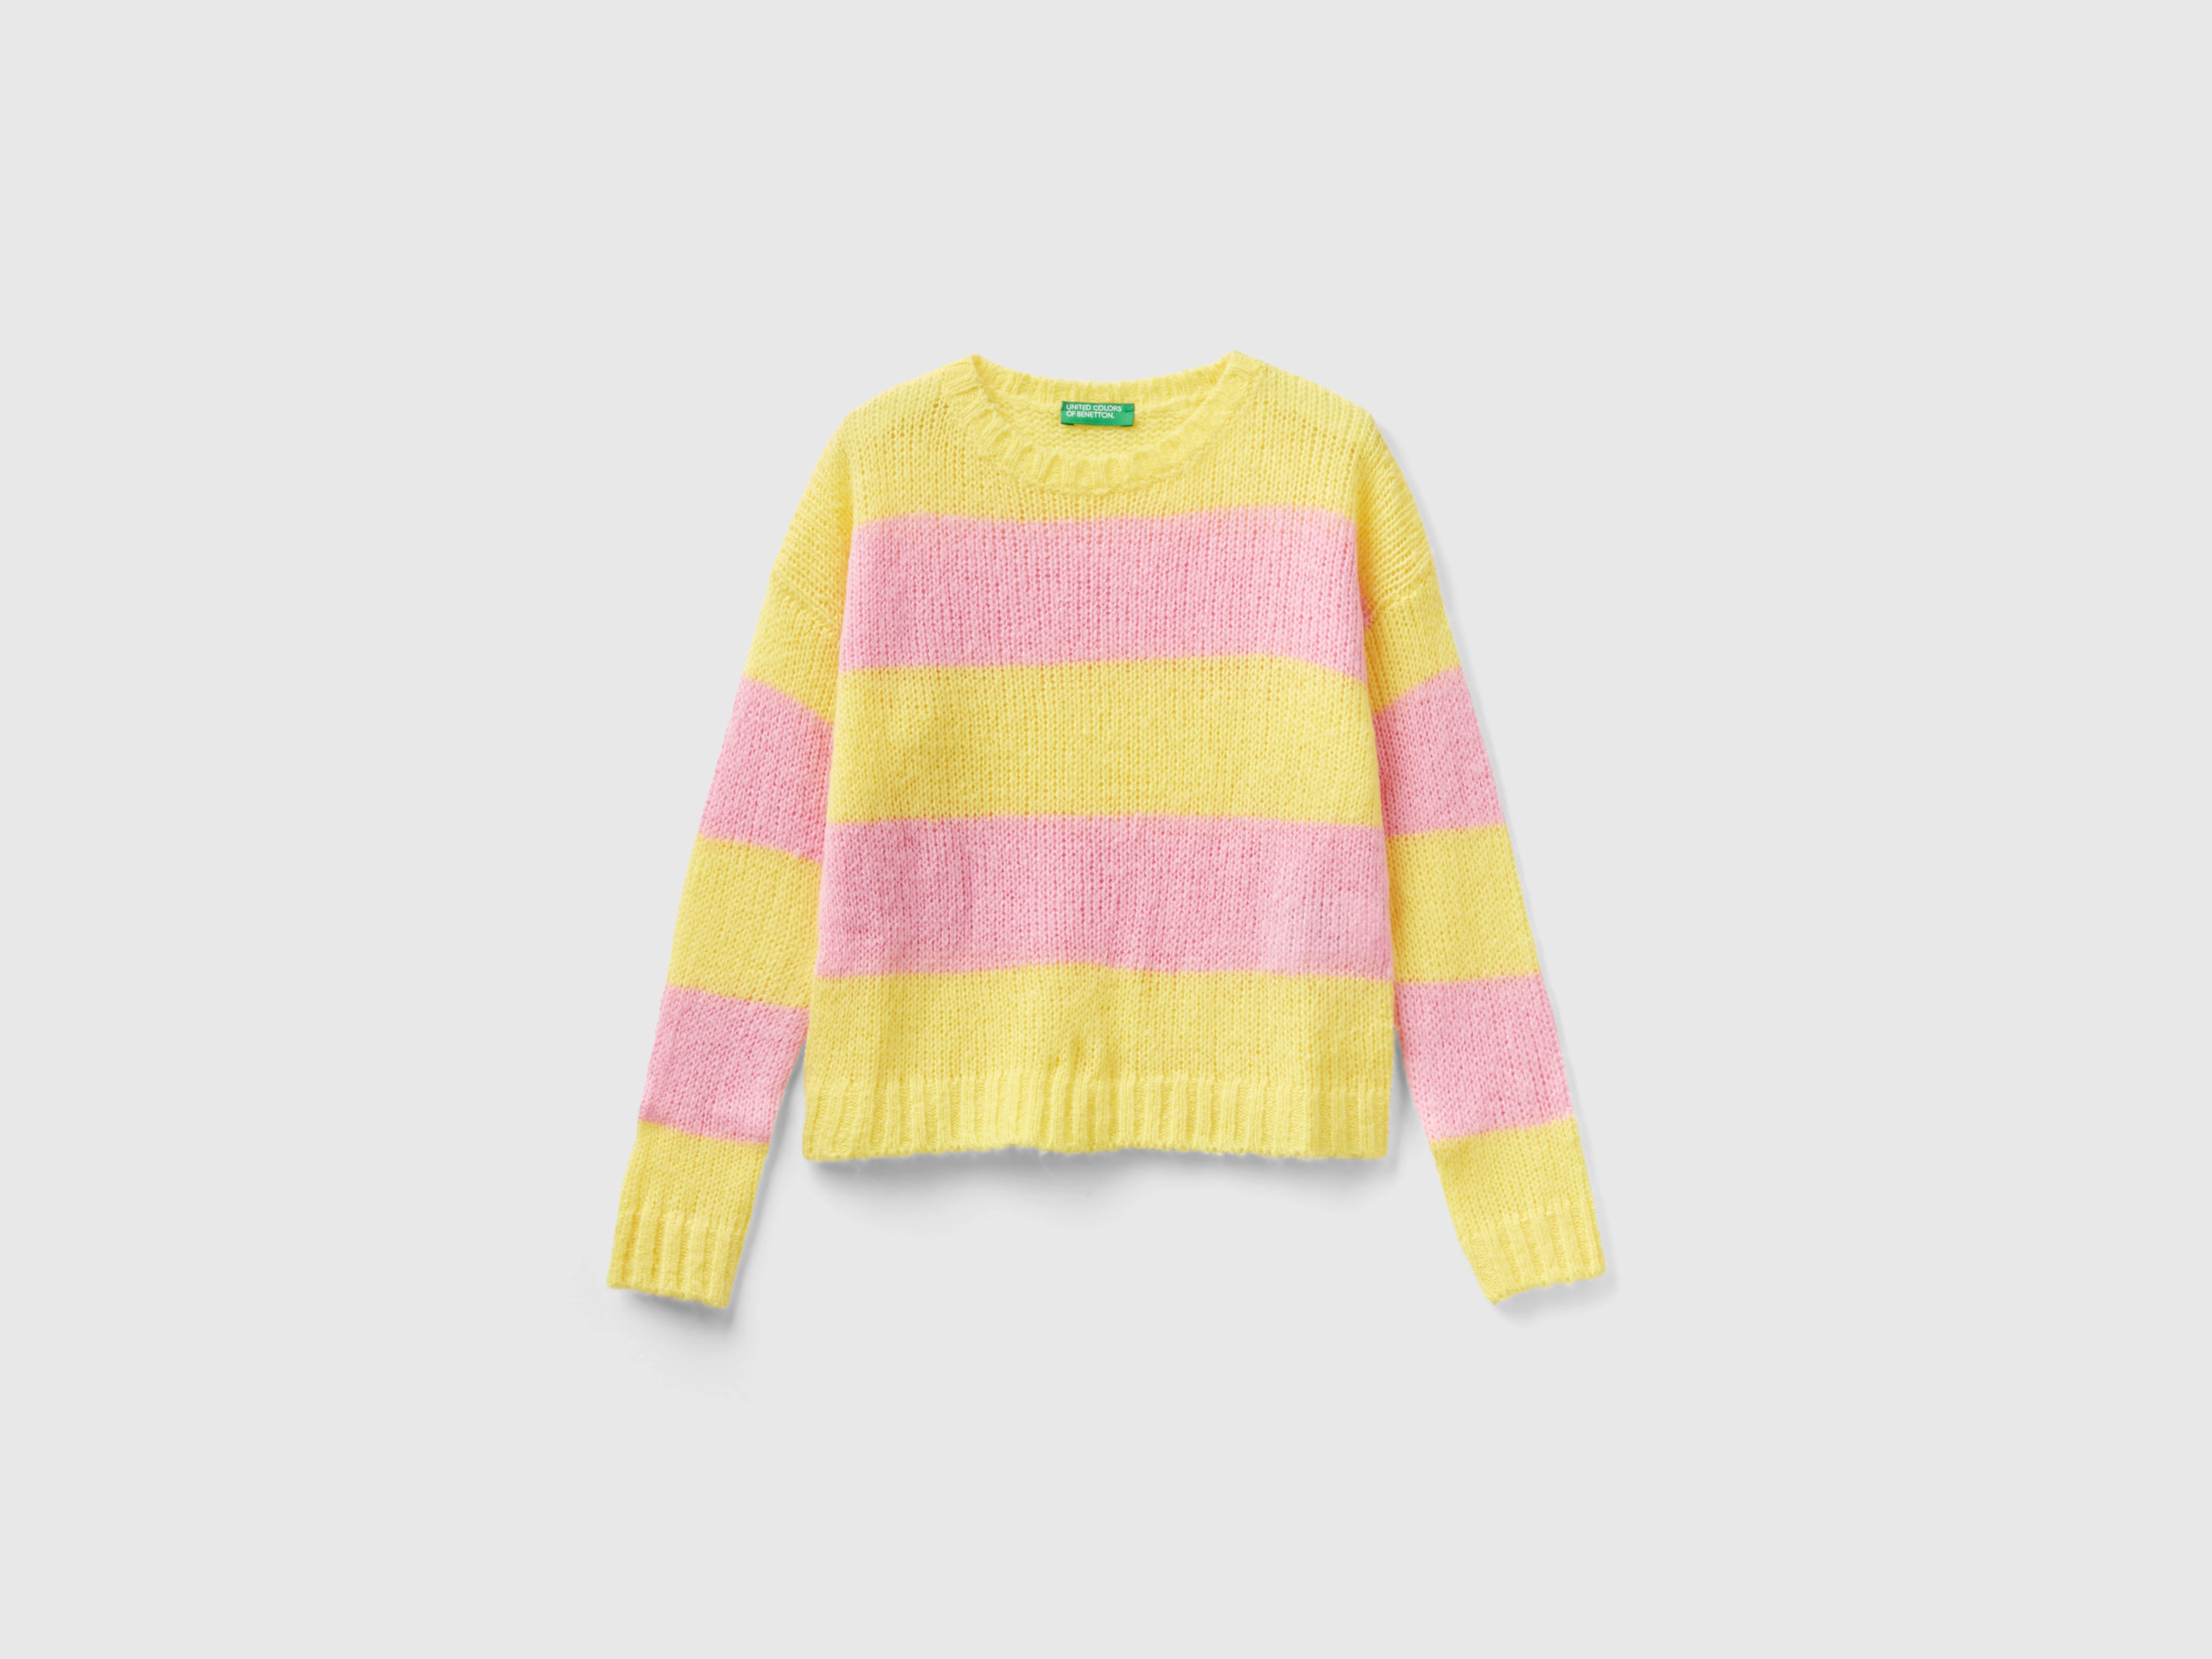 Benetton, Sweater With Two-tone Stripes, size M, Yellow, Kids